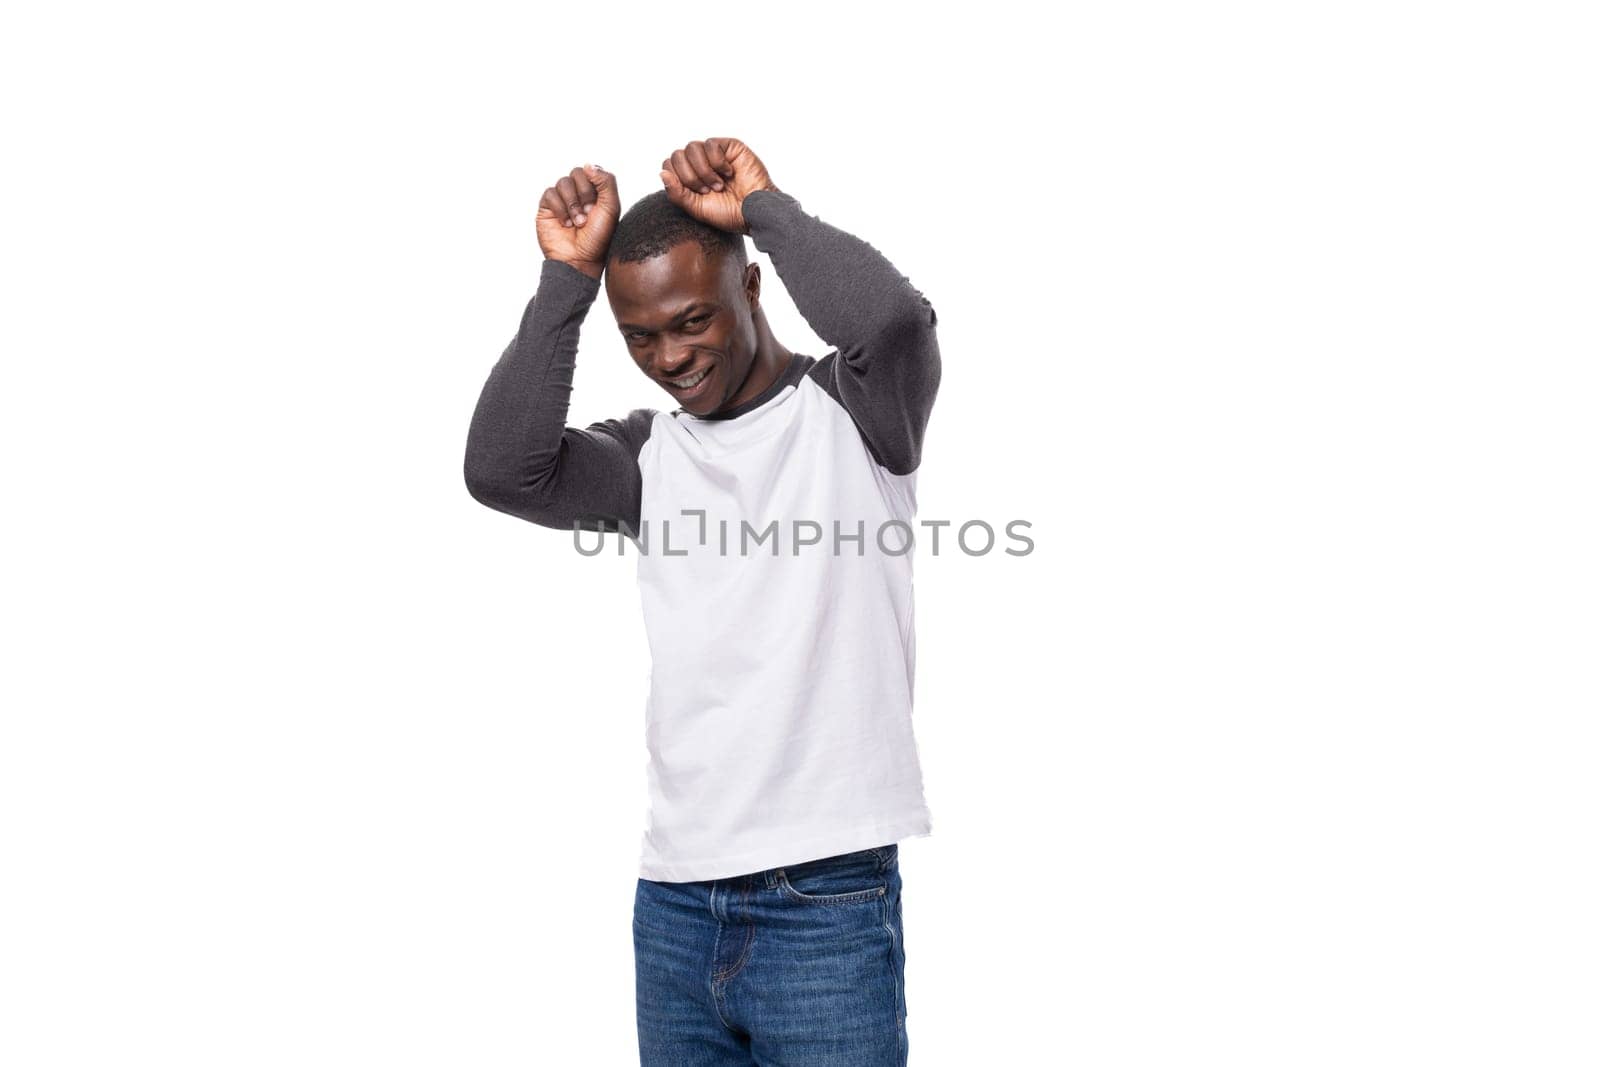 young slender African guy dressed in a black and white sweatshirt posing for the camera.